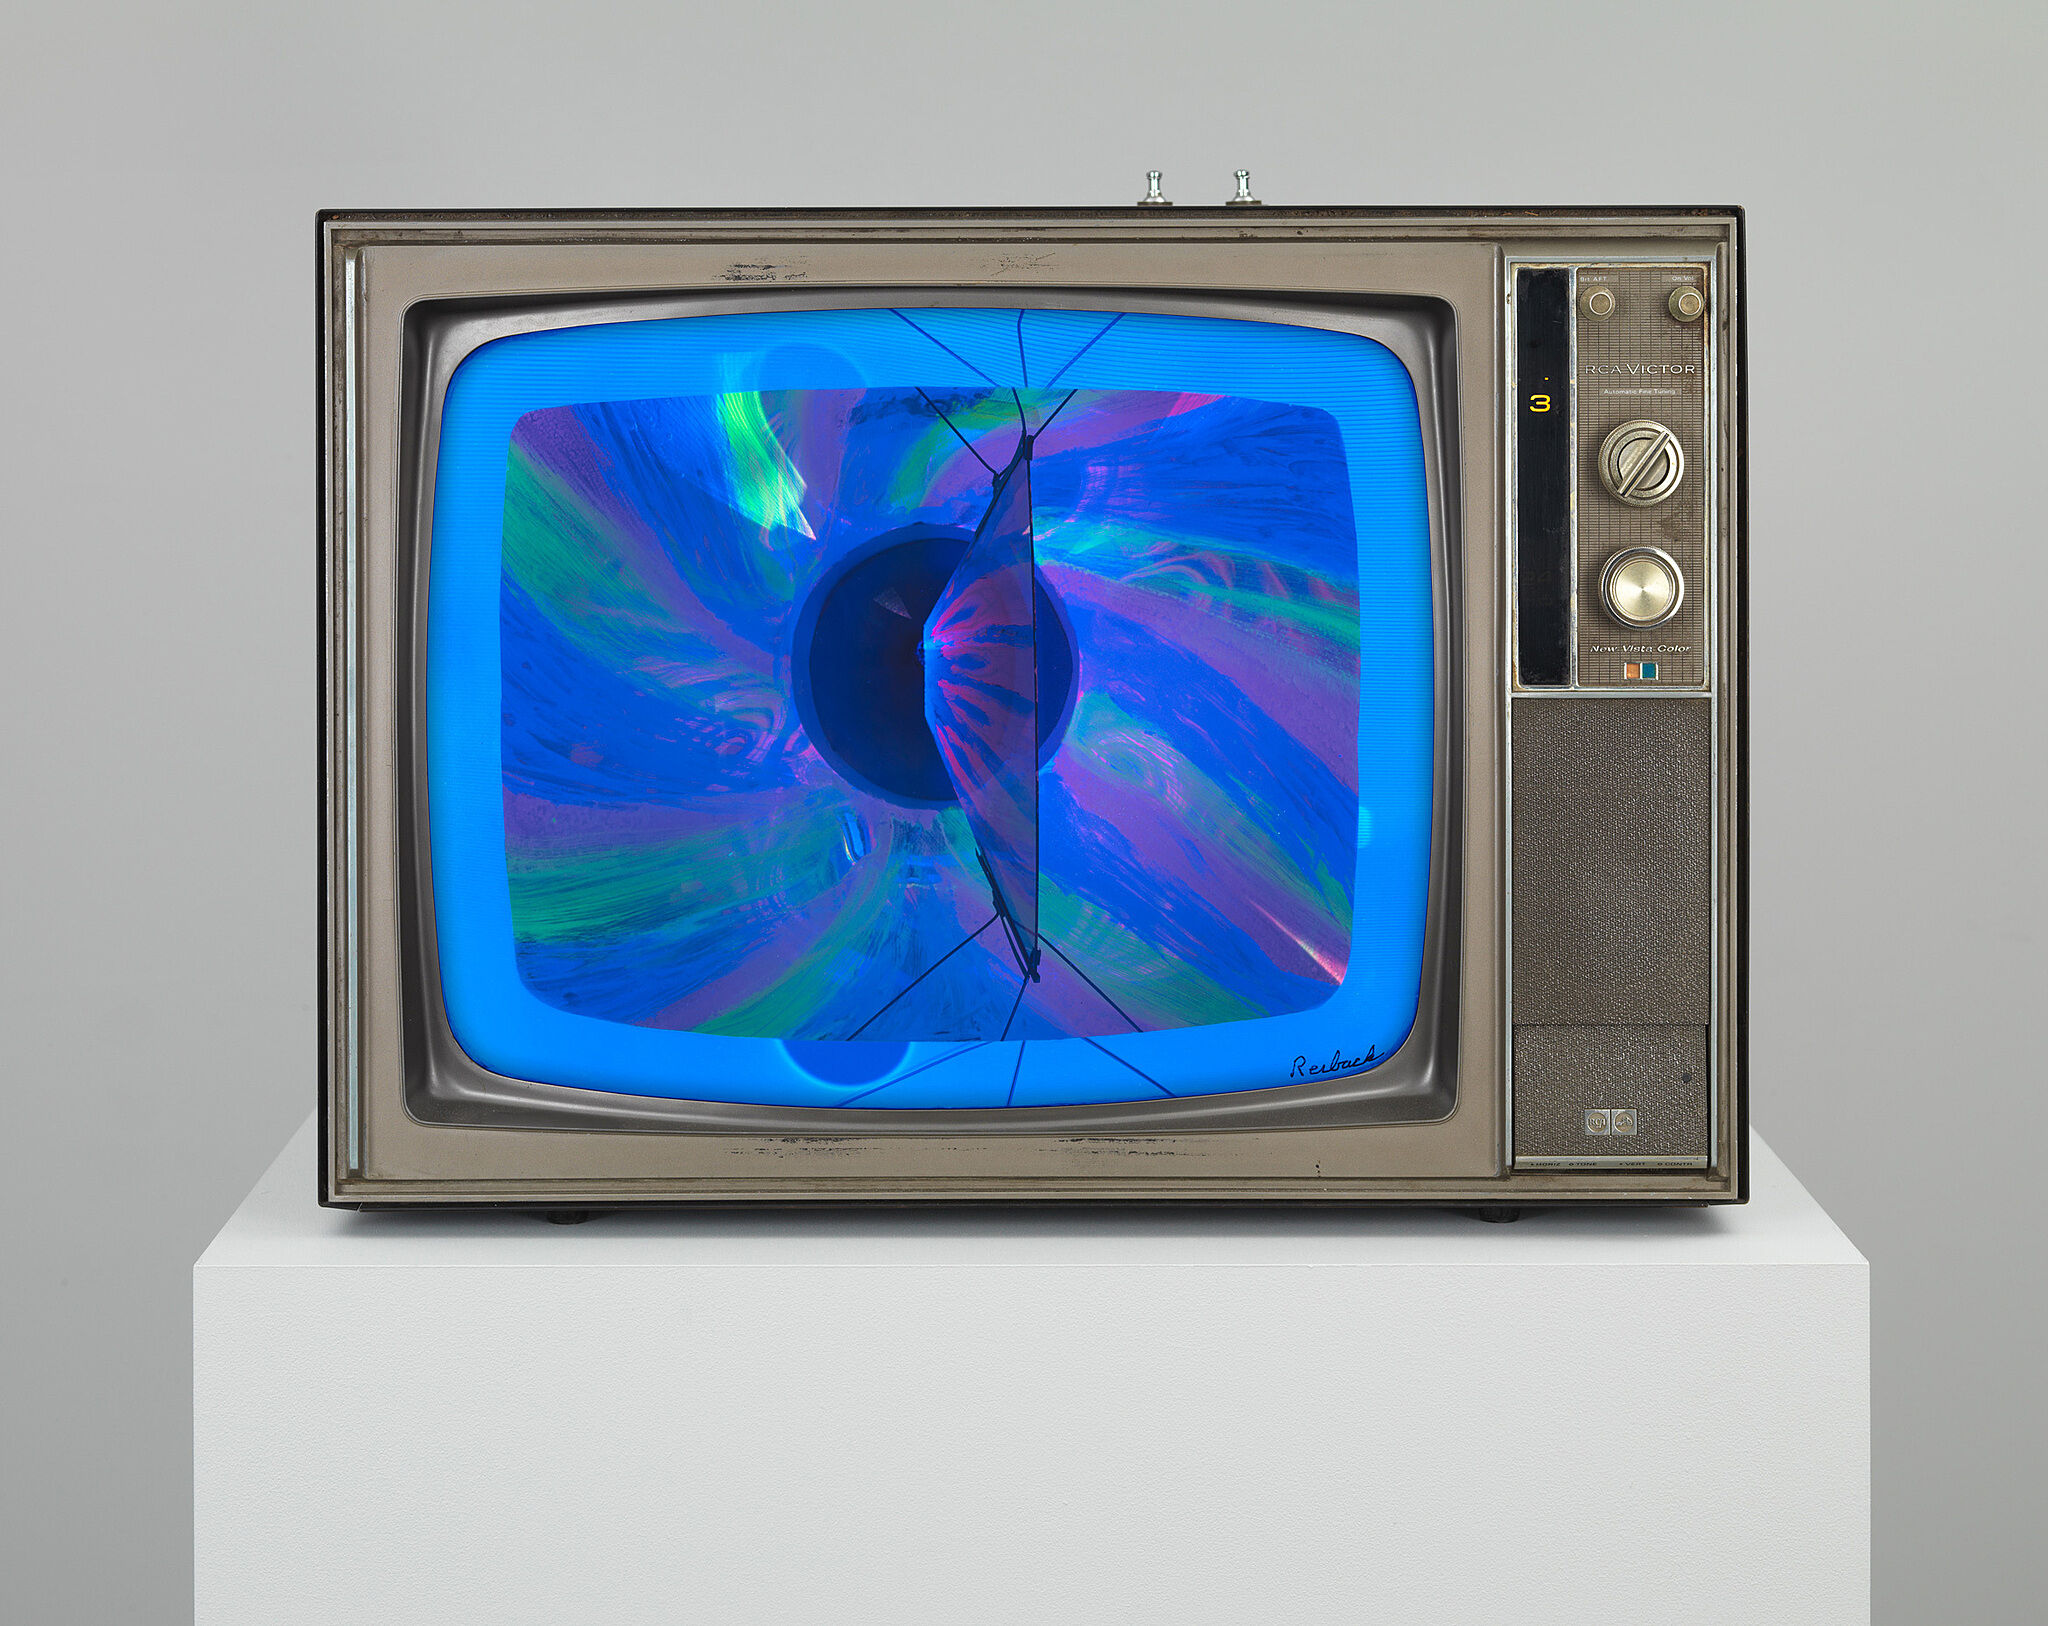 A television screen.